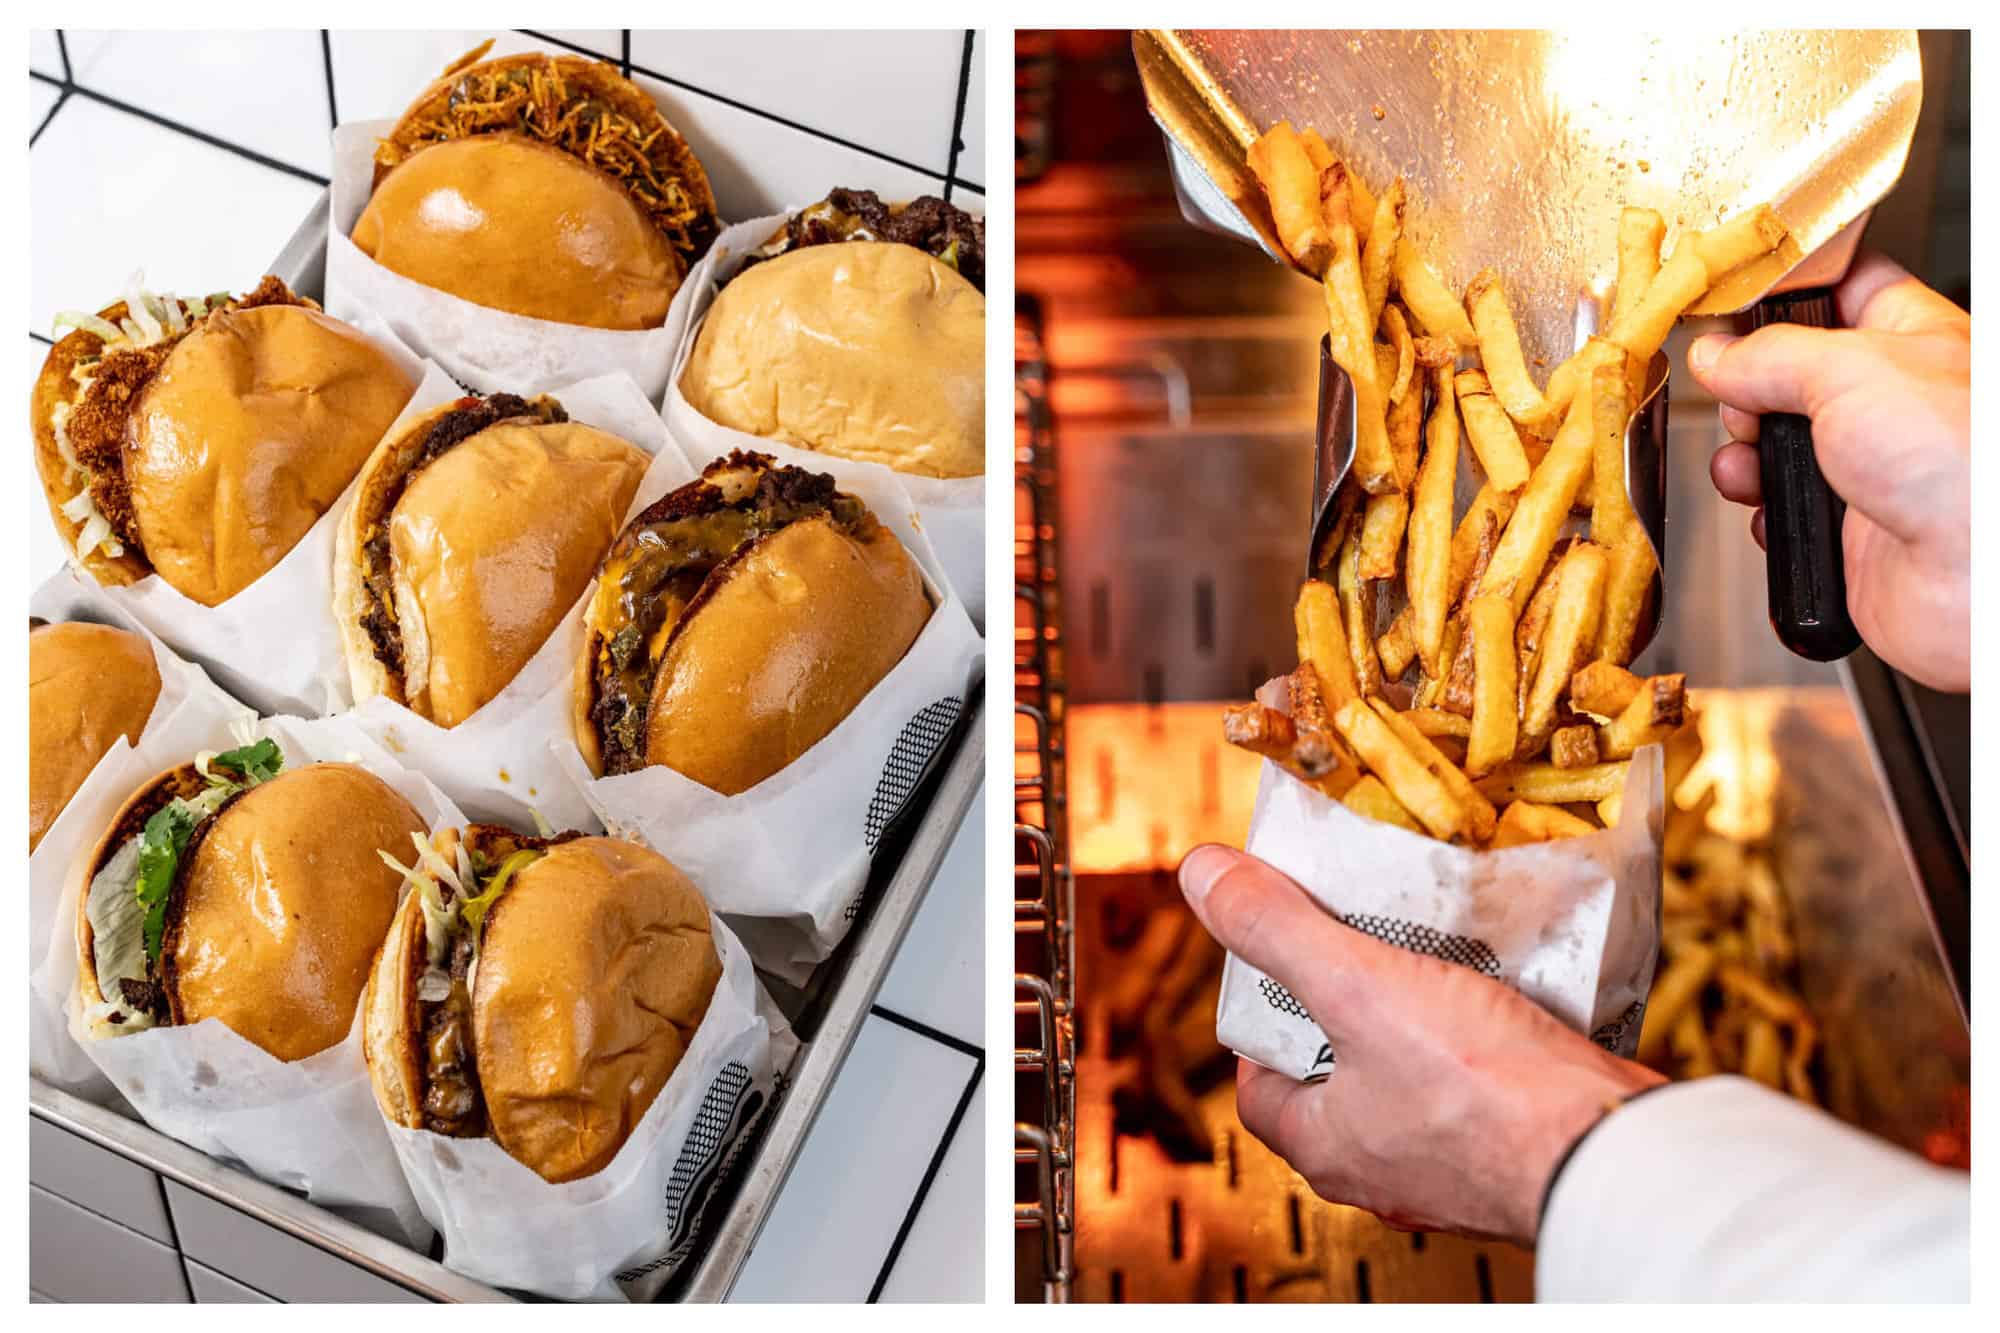 Left: three rows of burgers sitting in a tray at the restaurant Buns Paris. Right: a person scooping fries into a paper bag at Buns Paris.